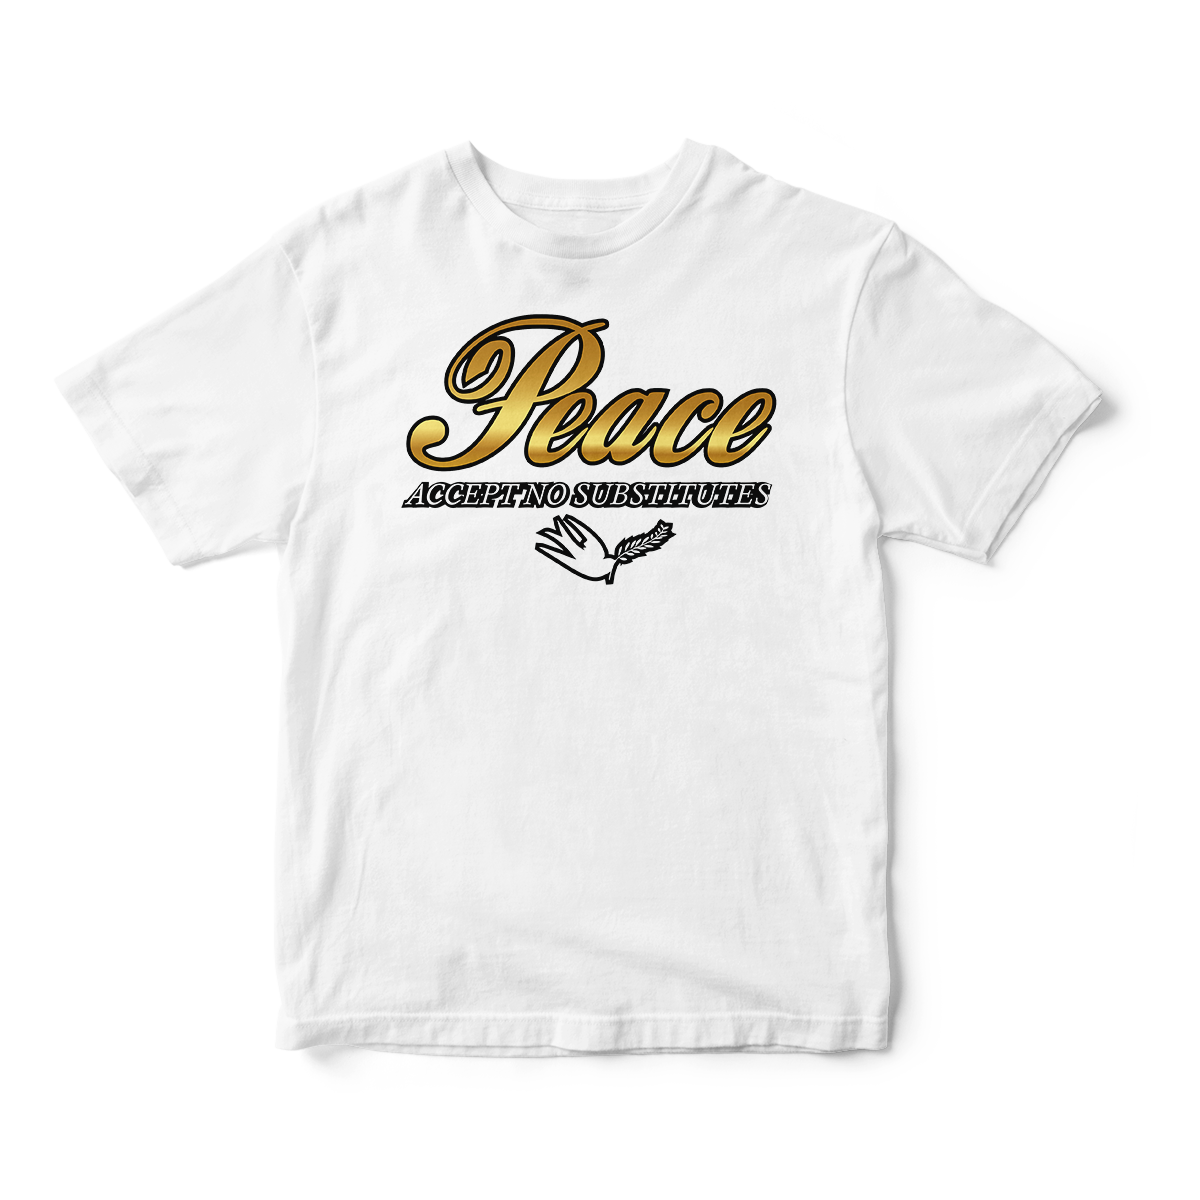 Peace No Subs in Gold Short Sleeve Tee